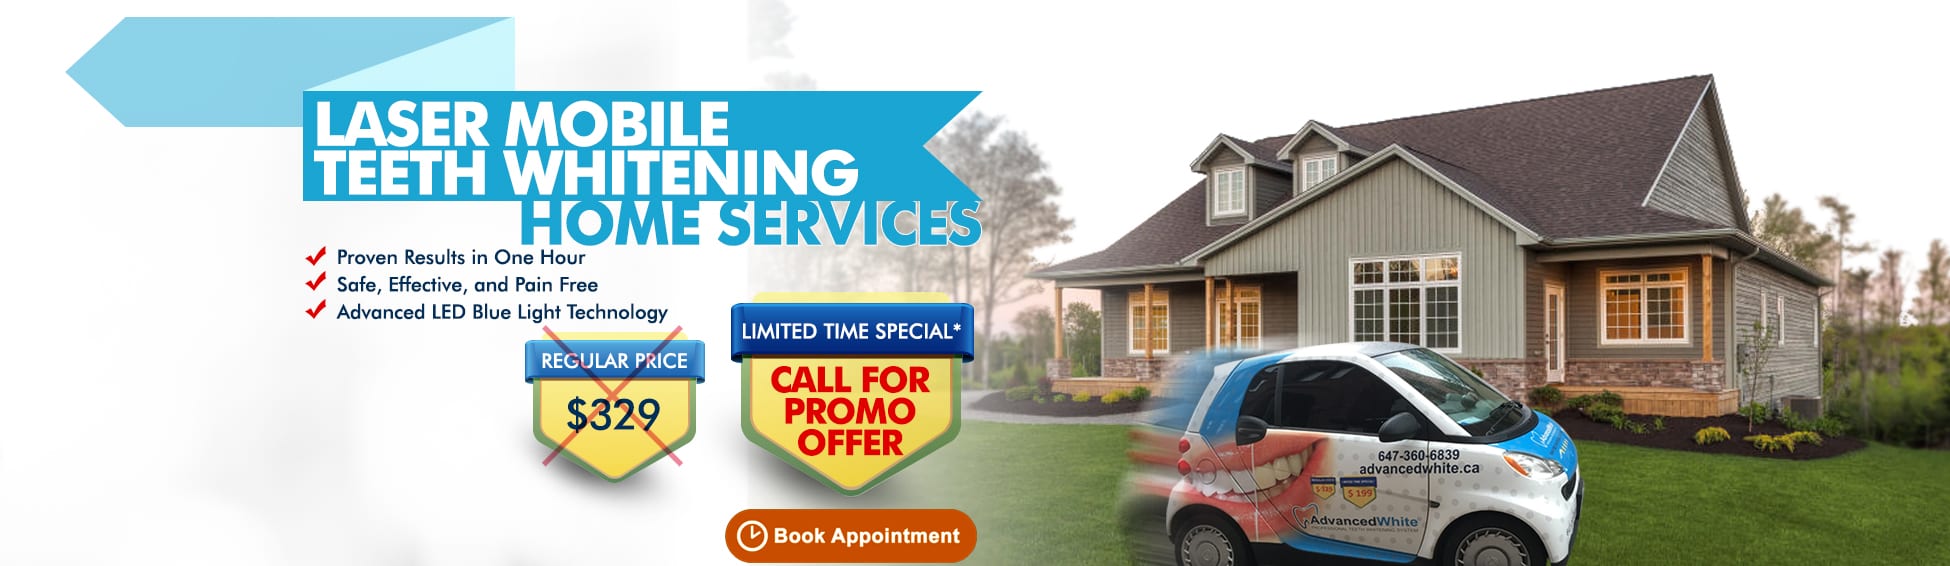 Laser Mobile Teeth Whiting Home Services– Call For Promo Offer